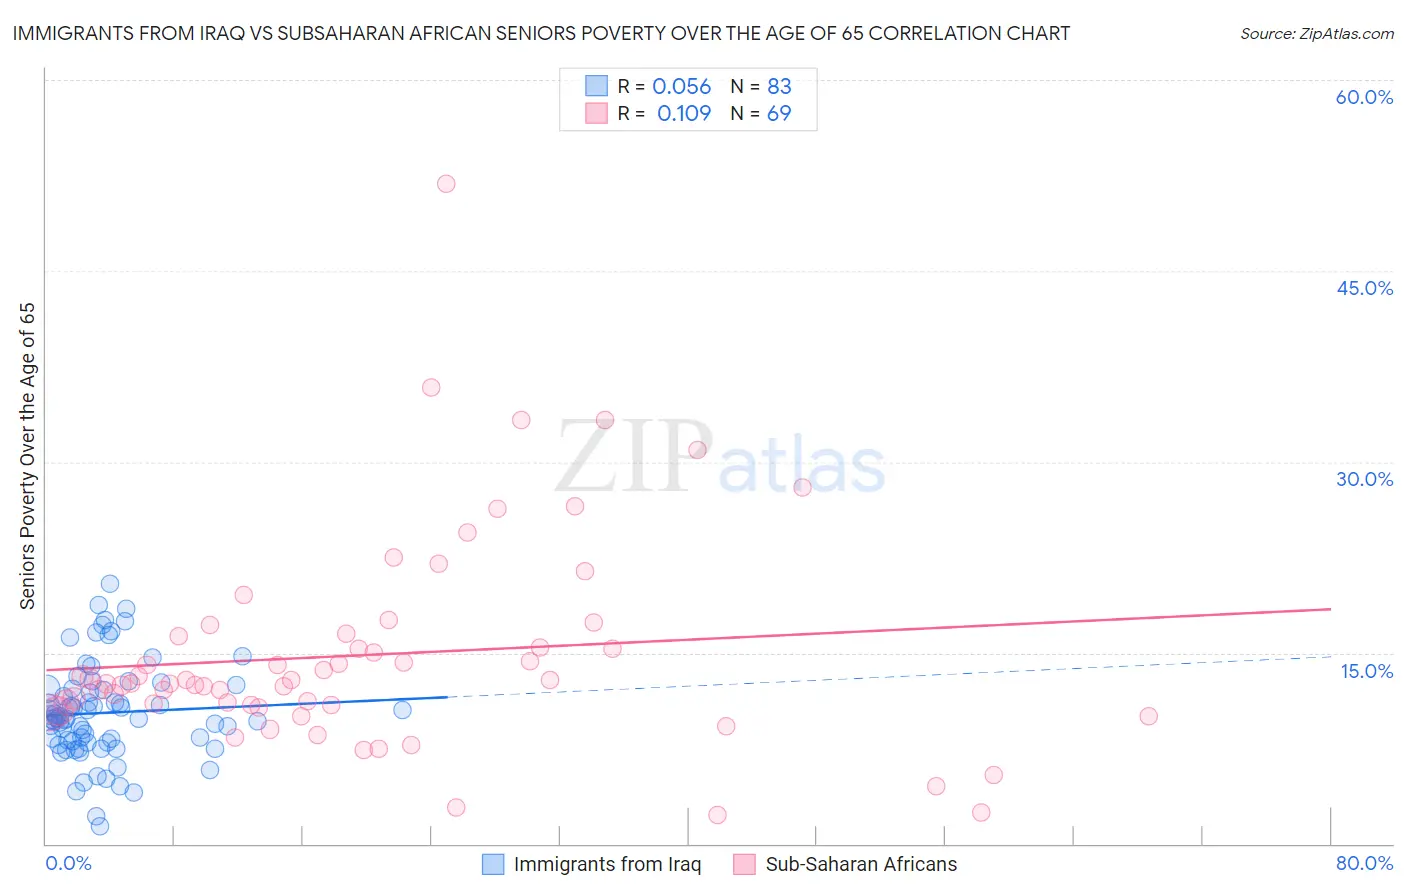 Immigrants from Iraq vs Subsaharan African Seniors Poverty Over the Age of 65